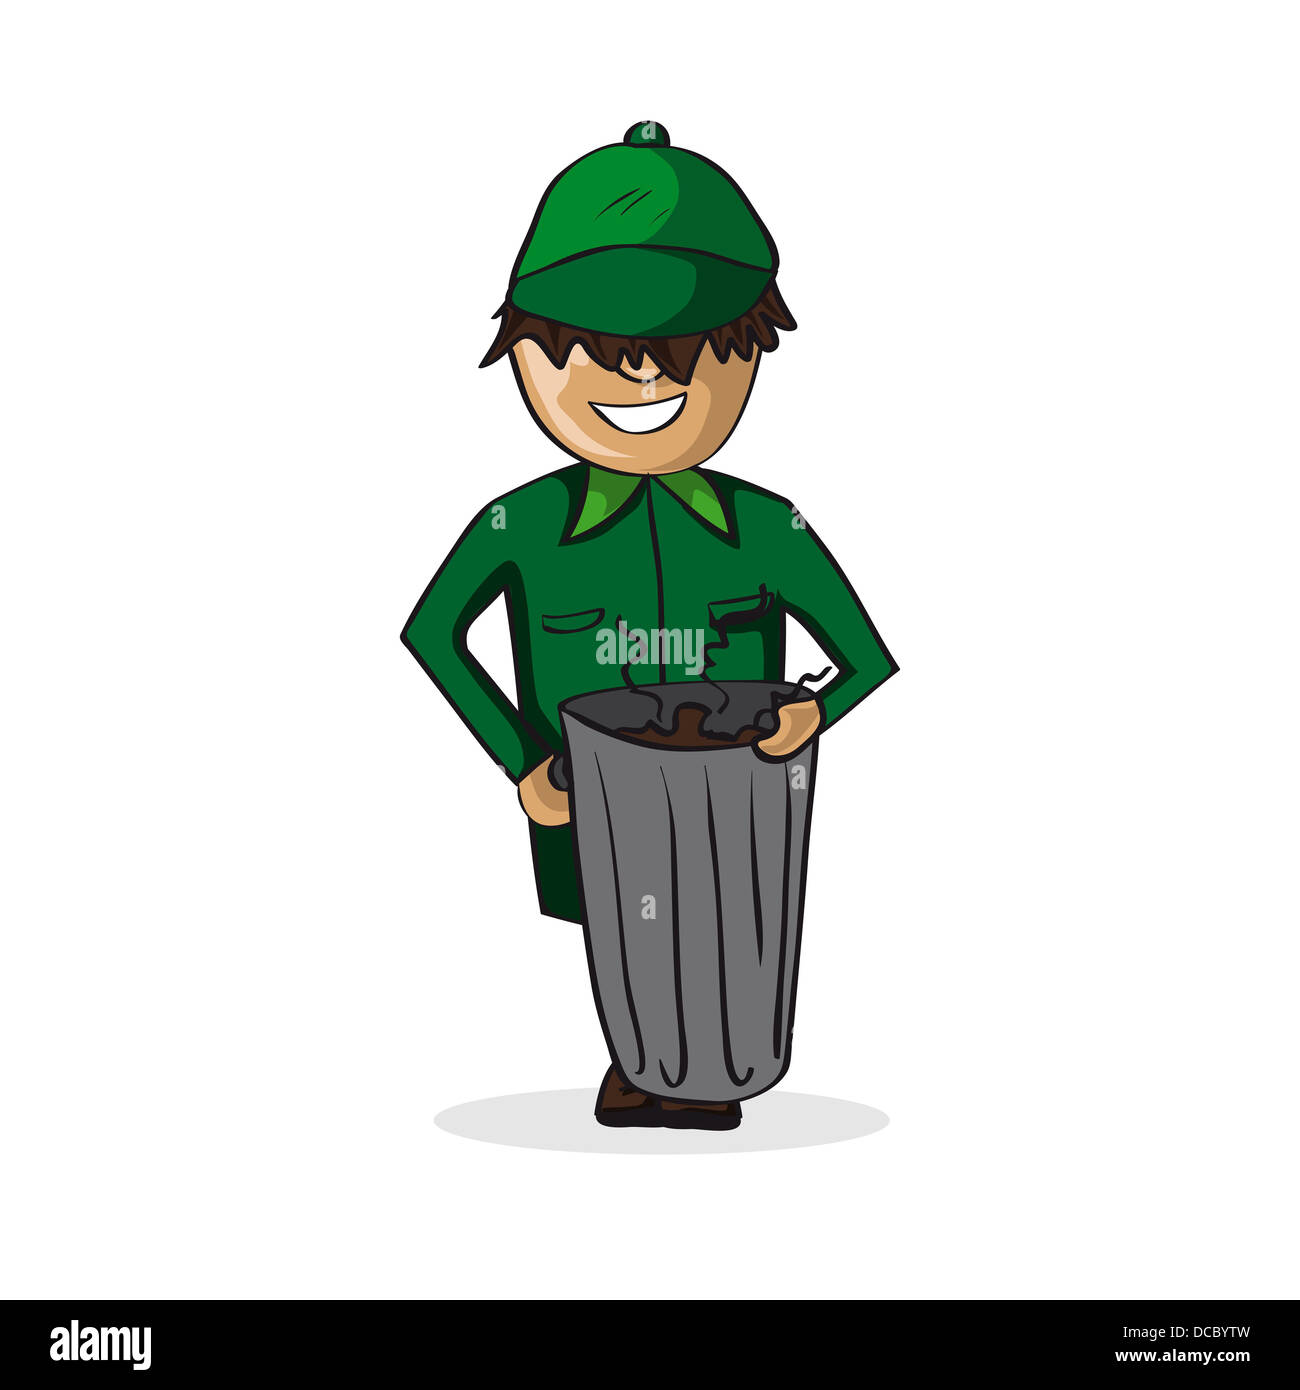 Profession career trash man, work success illustration. Vector file layered for easy personalization. Stock Photo